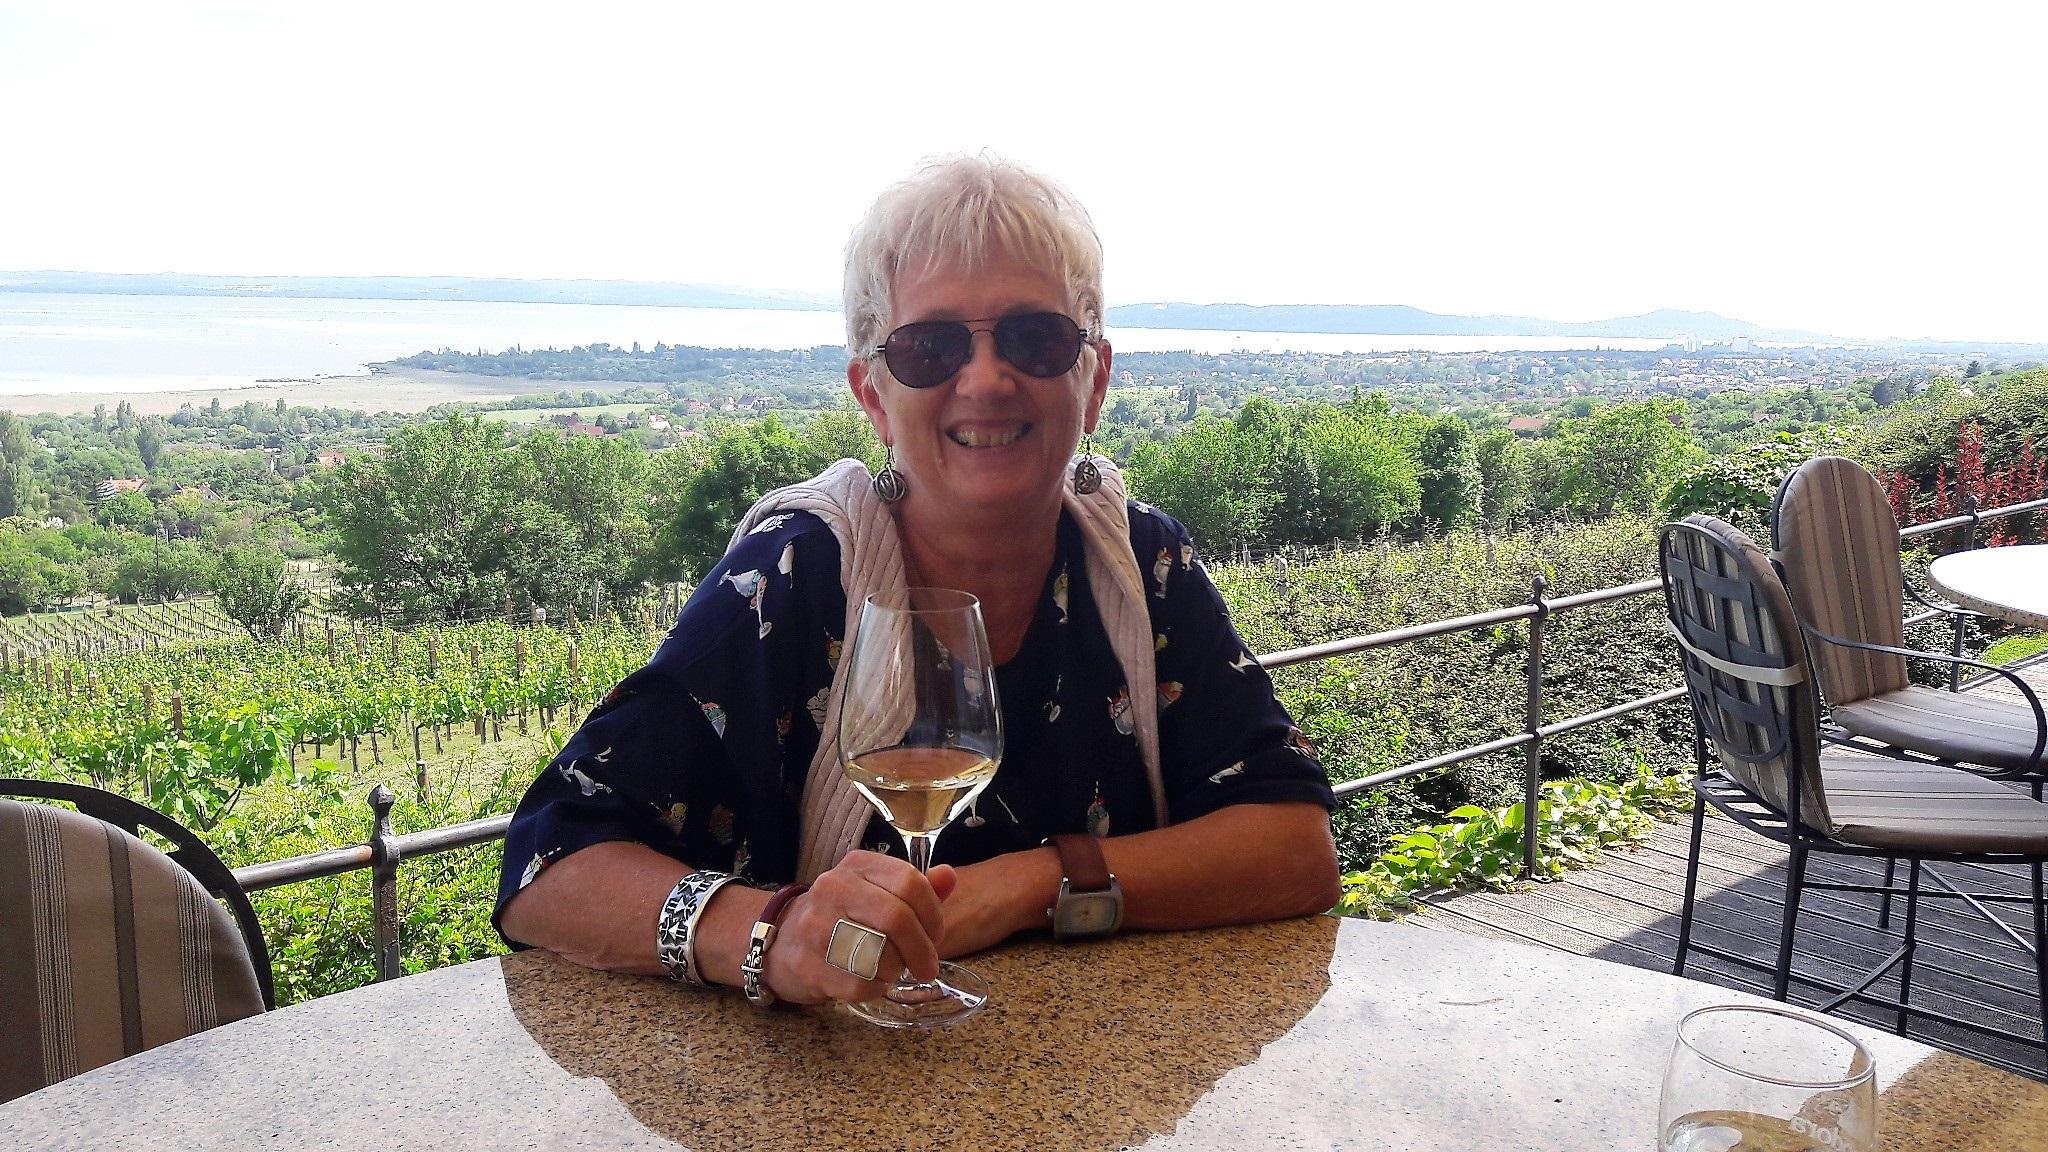 Interview Two: Agnes Weninger, Update: Former Editor-in-Chief, Best Of Budapest & Hungary